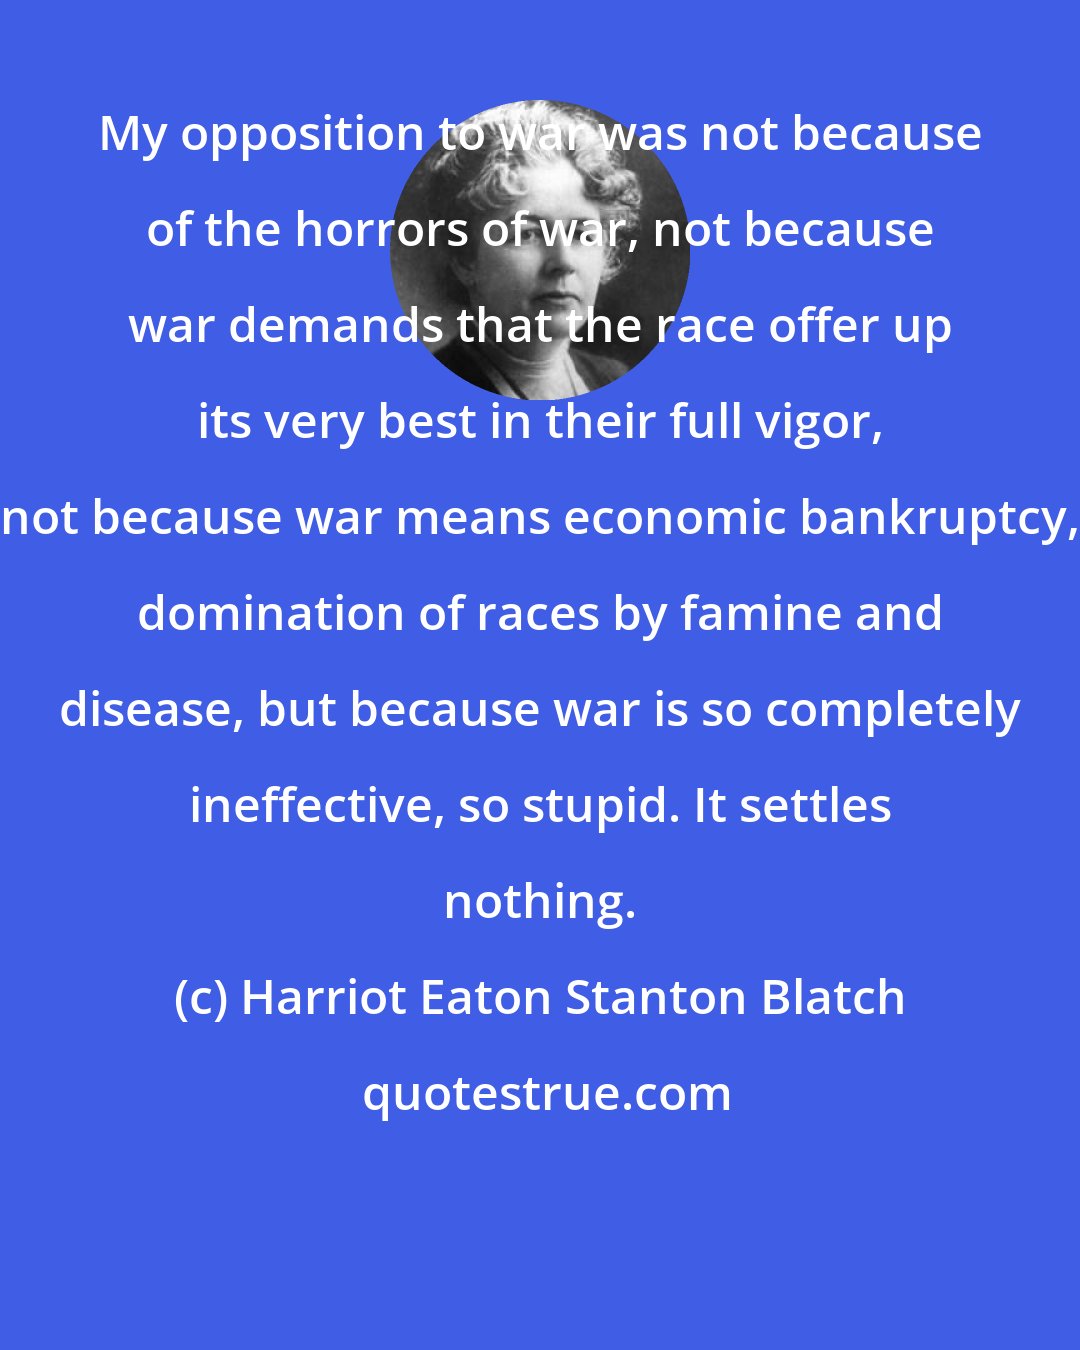 Harriot Eaton Stanton Blatch: My opposition to war was not because of the horrors of war, not because war demands that the race offer up its very best in their full vigor, not because war means economic bankruptcy, domination of races by famine and disease, but because war is so completely ineffective, so stupid. It settles nothing.